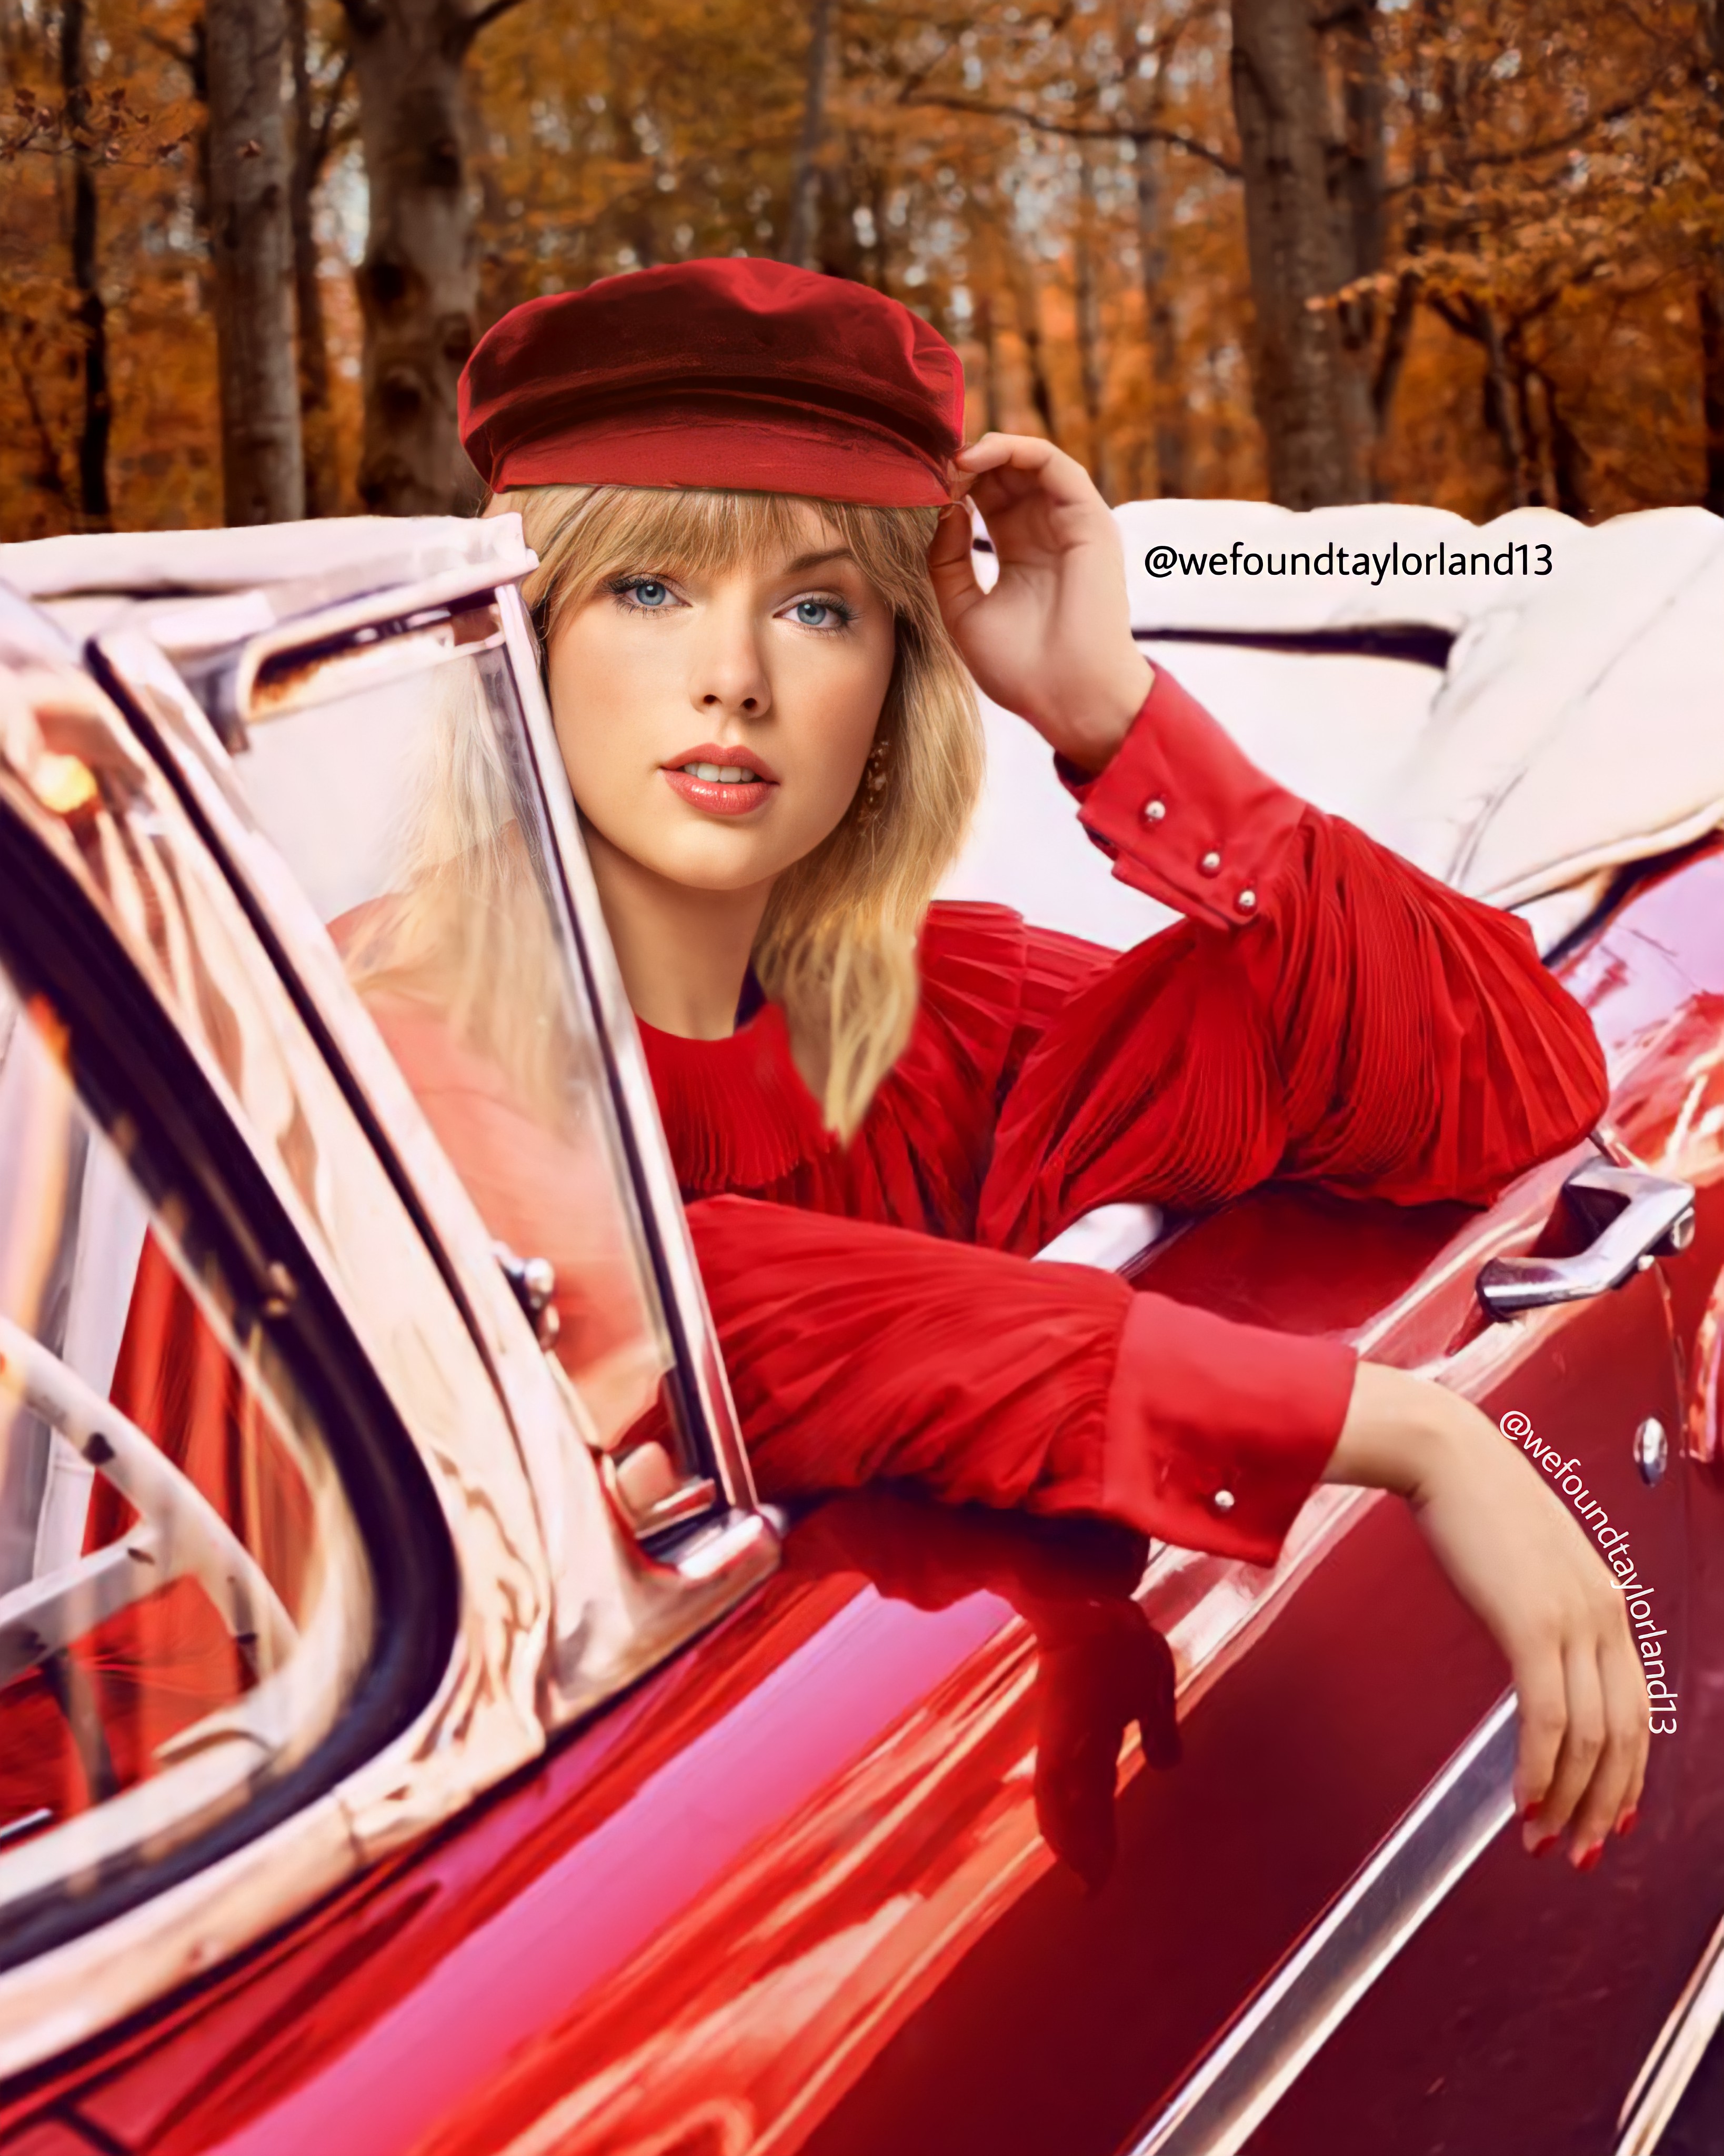 RED Taylor's version fan-made photoshoot edit by ME! 😂 ️ | Scrolller